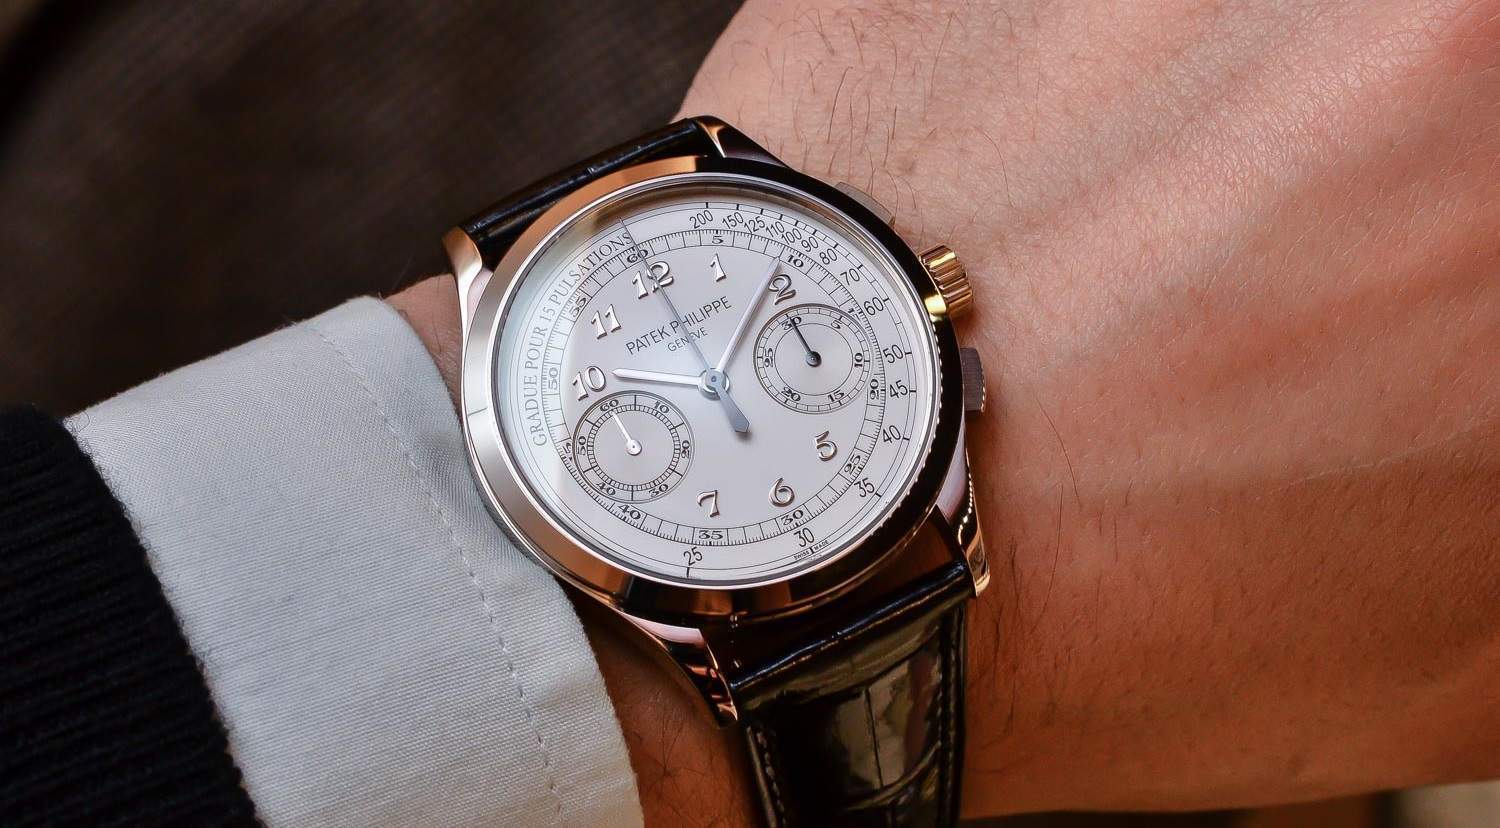 Your Patek Philippe watch guide ahead of the Heritage Auctions sale